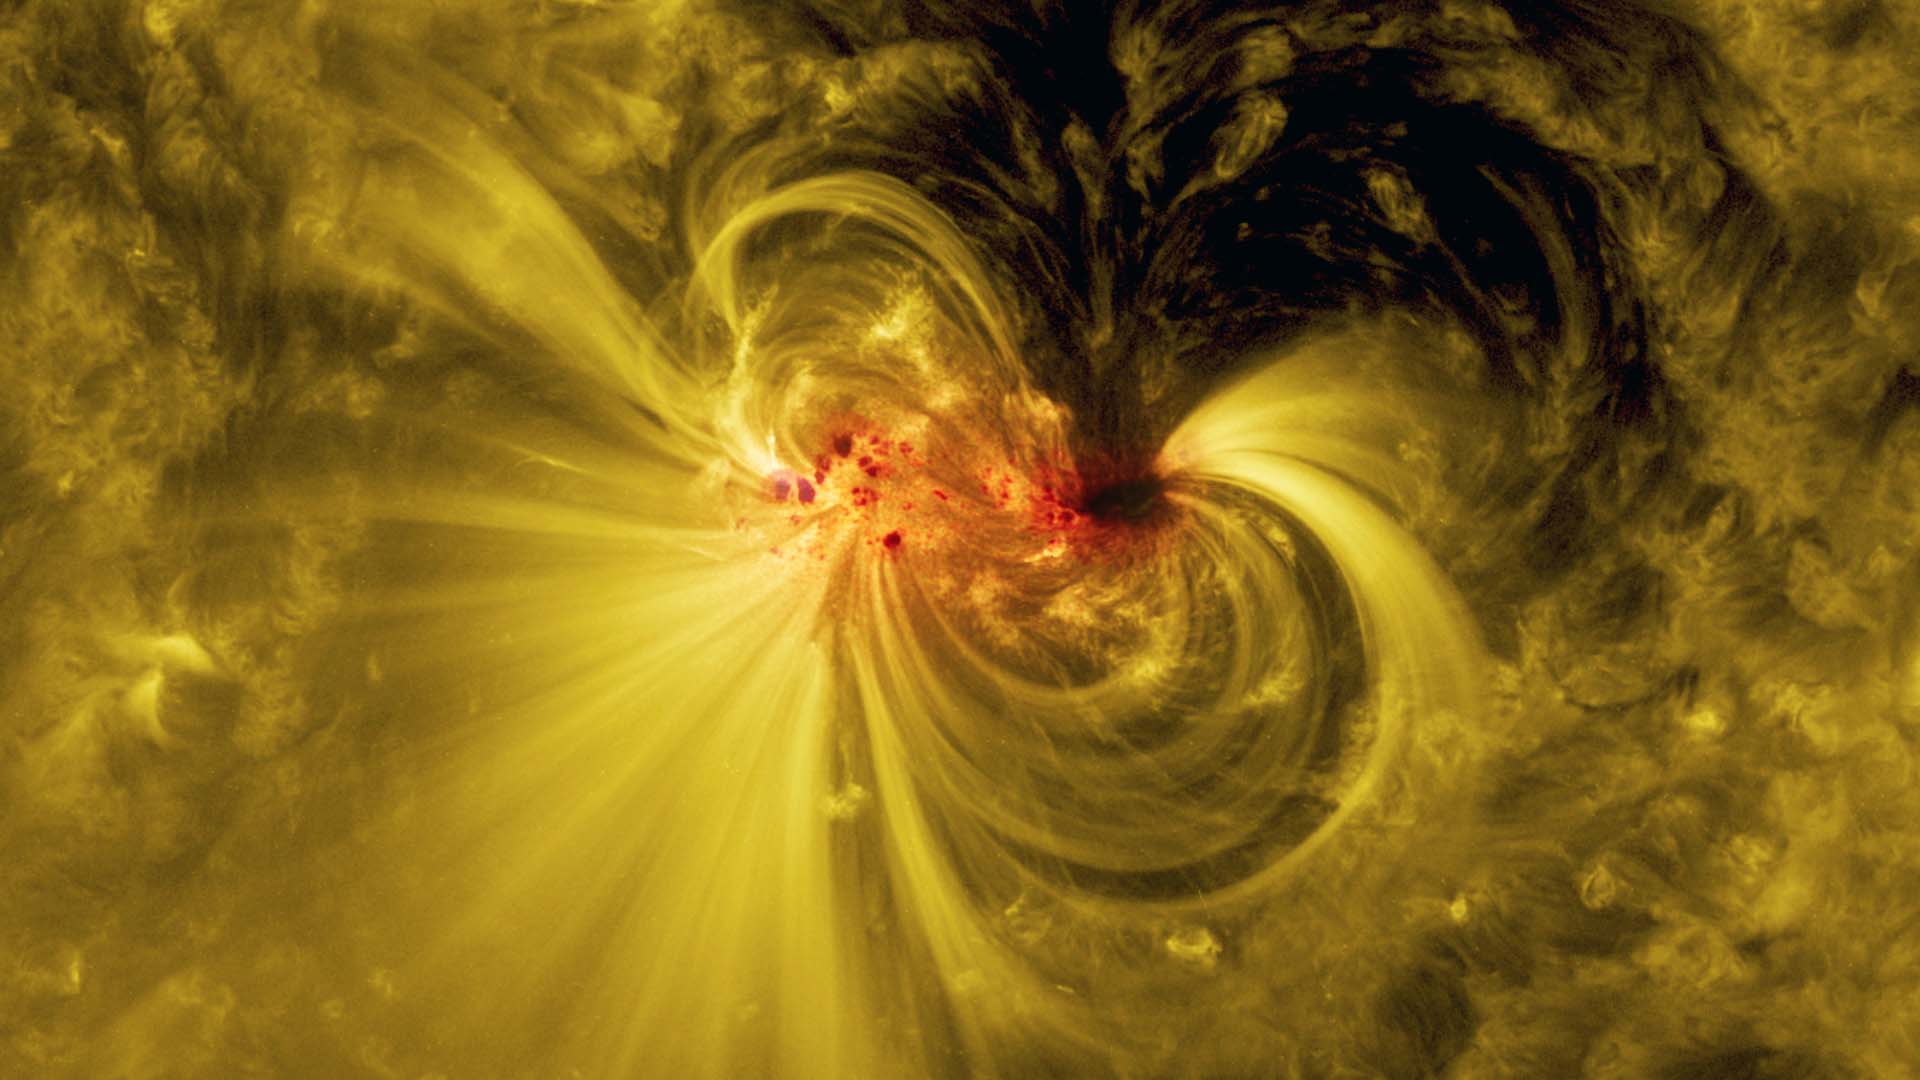 An image of a sunspot on the Sun's surface, appearing like an area of black and red spots connected by swirls of yellow material that almost form a figure-8. The Sun's surface is covered in swirling material from bright yellow to dark yellow and black.